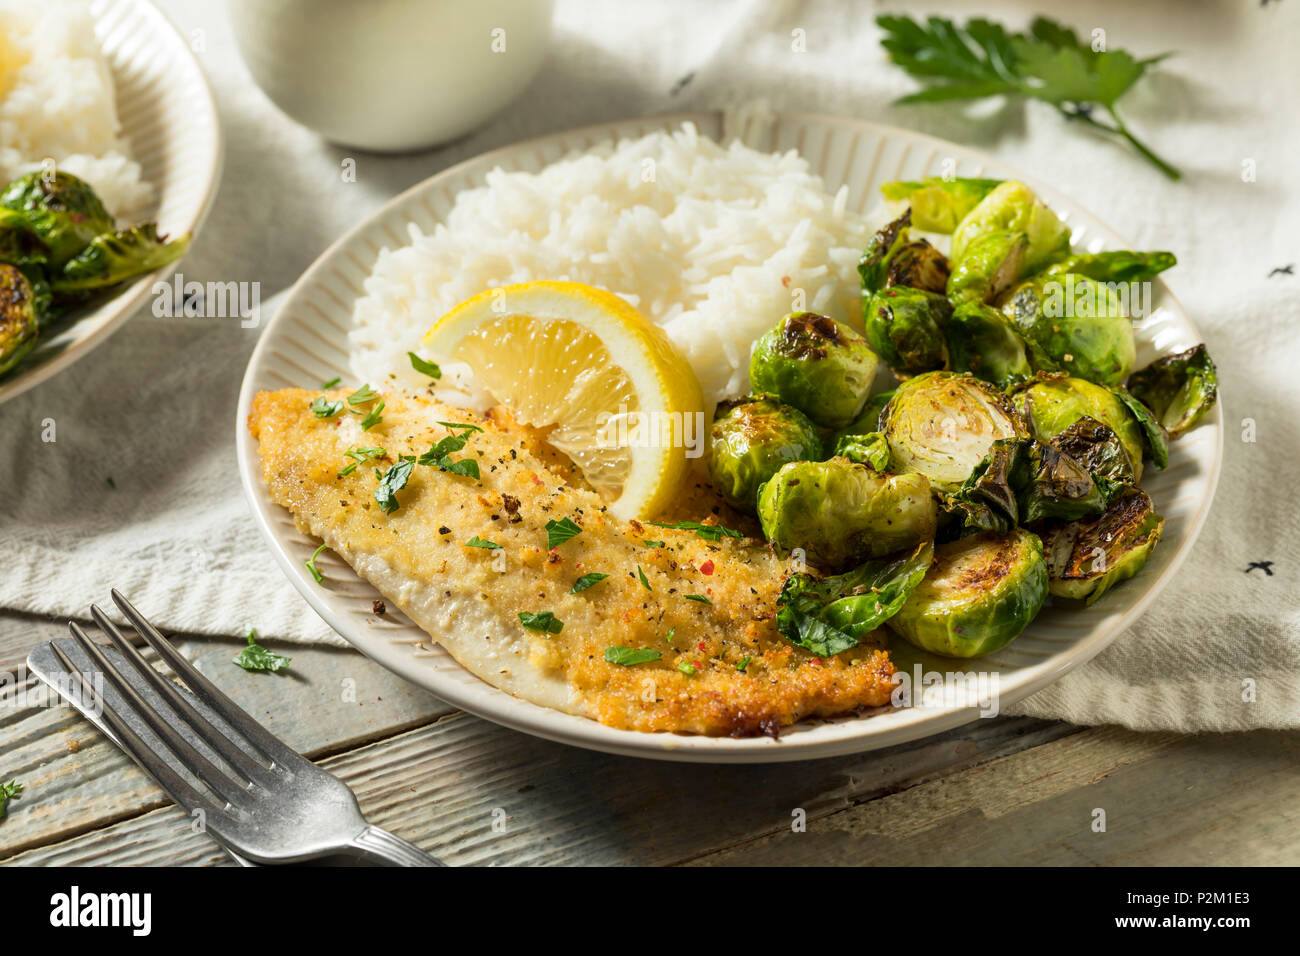 Homemade White Fish Filet Dinner with Rice and Brussel Sprouts Stock Photo